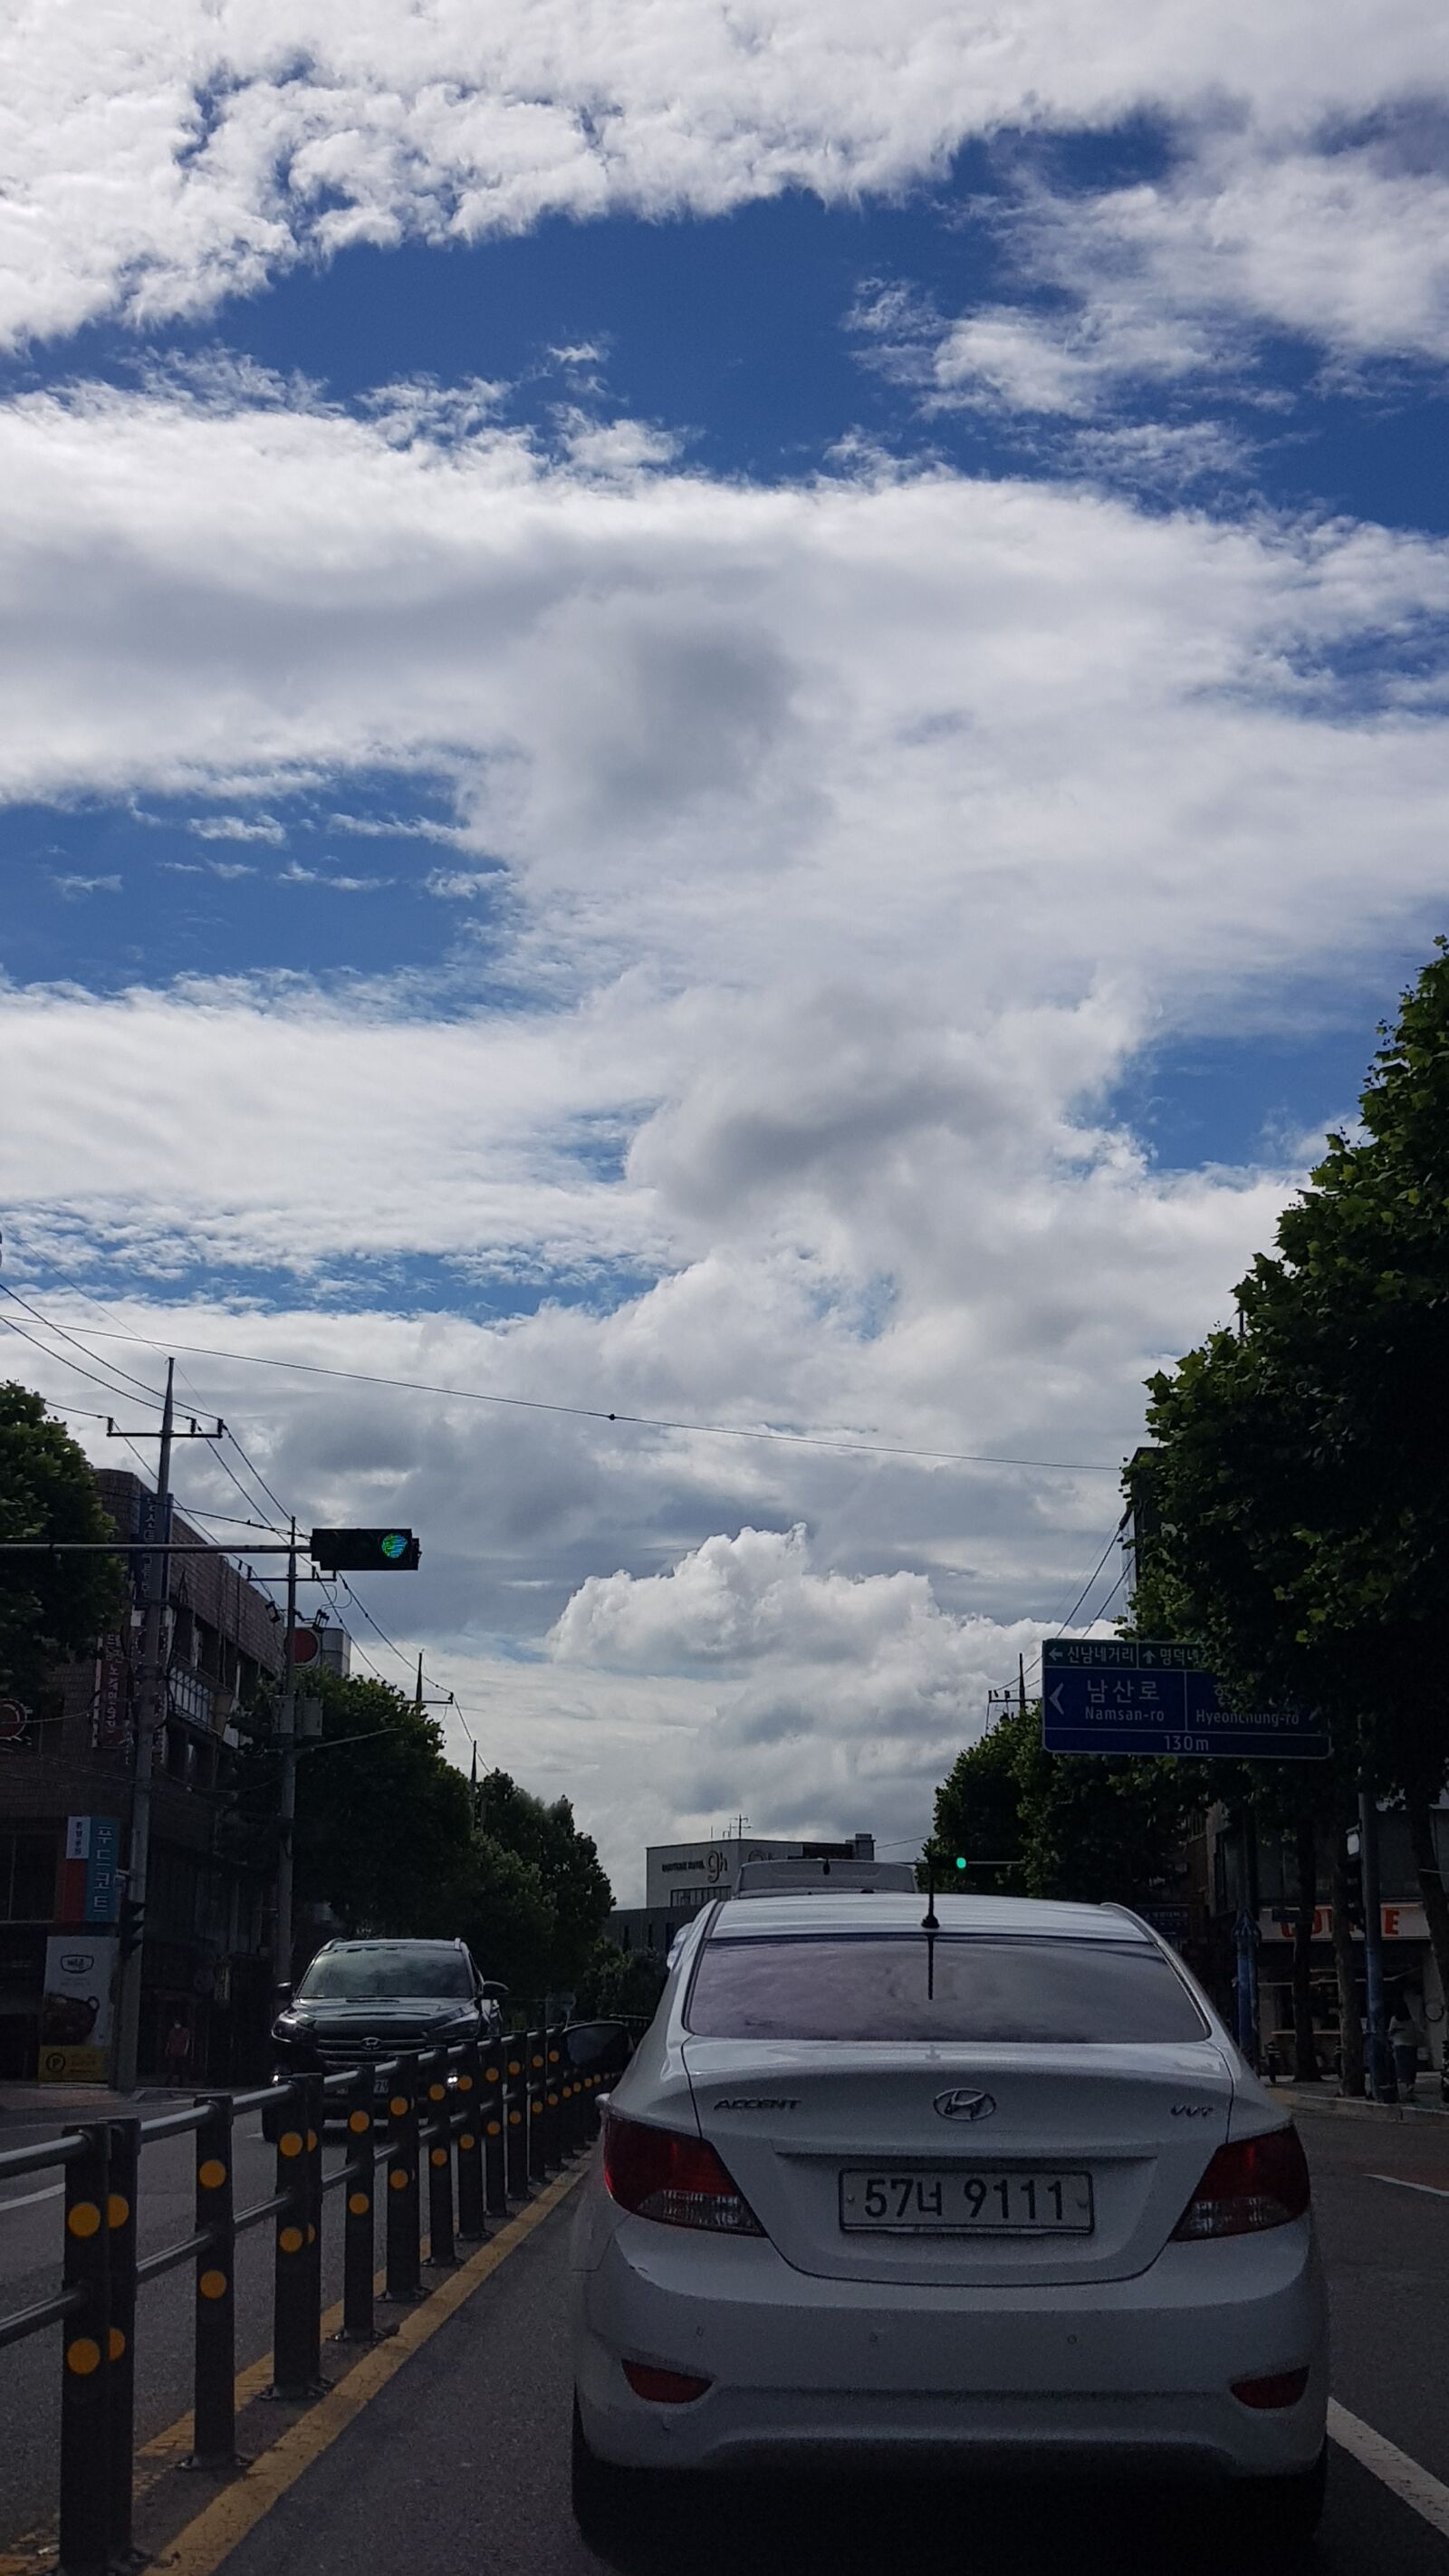 Samsung Galaxy Note9 sample photo. Photpgraphy, clouds, sky photography